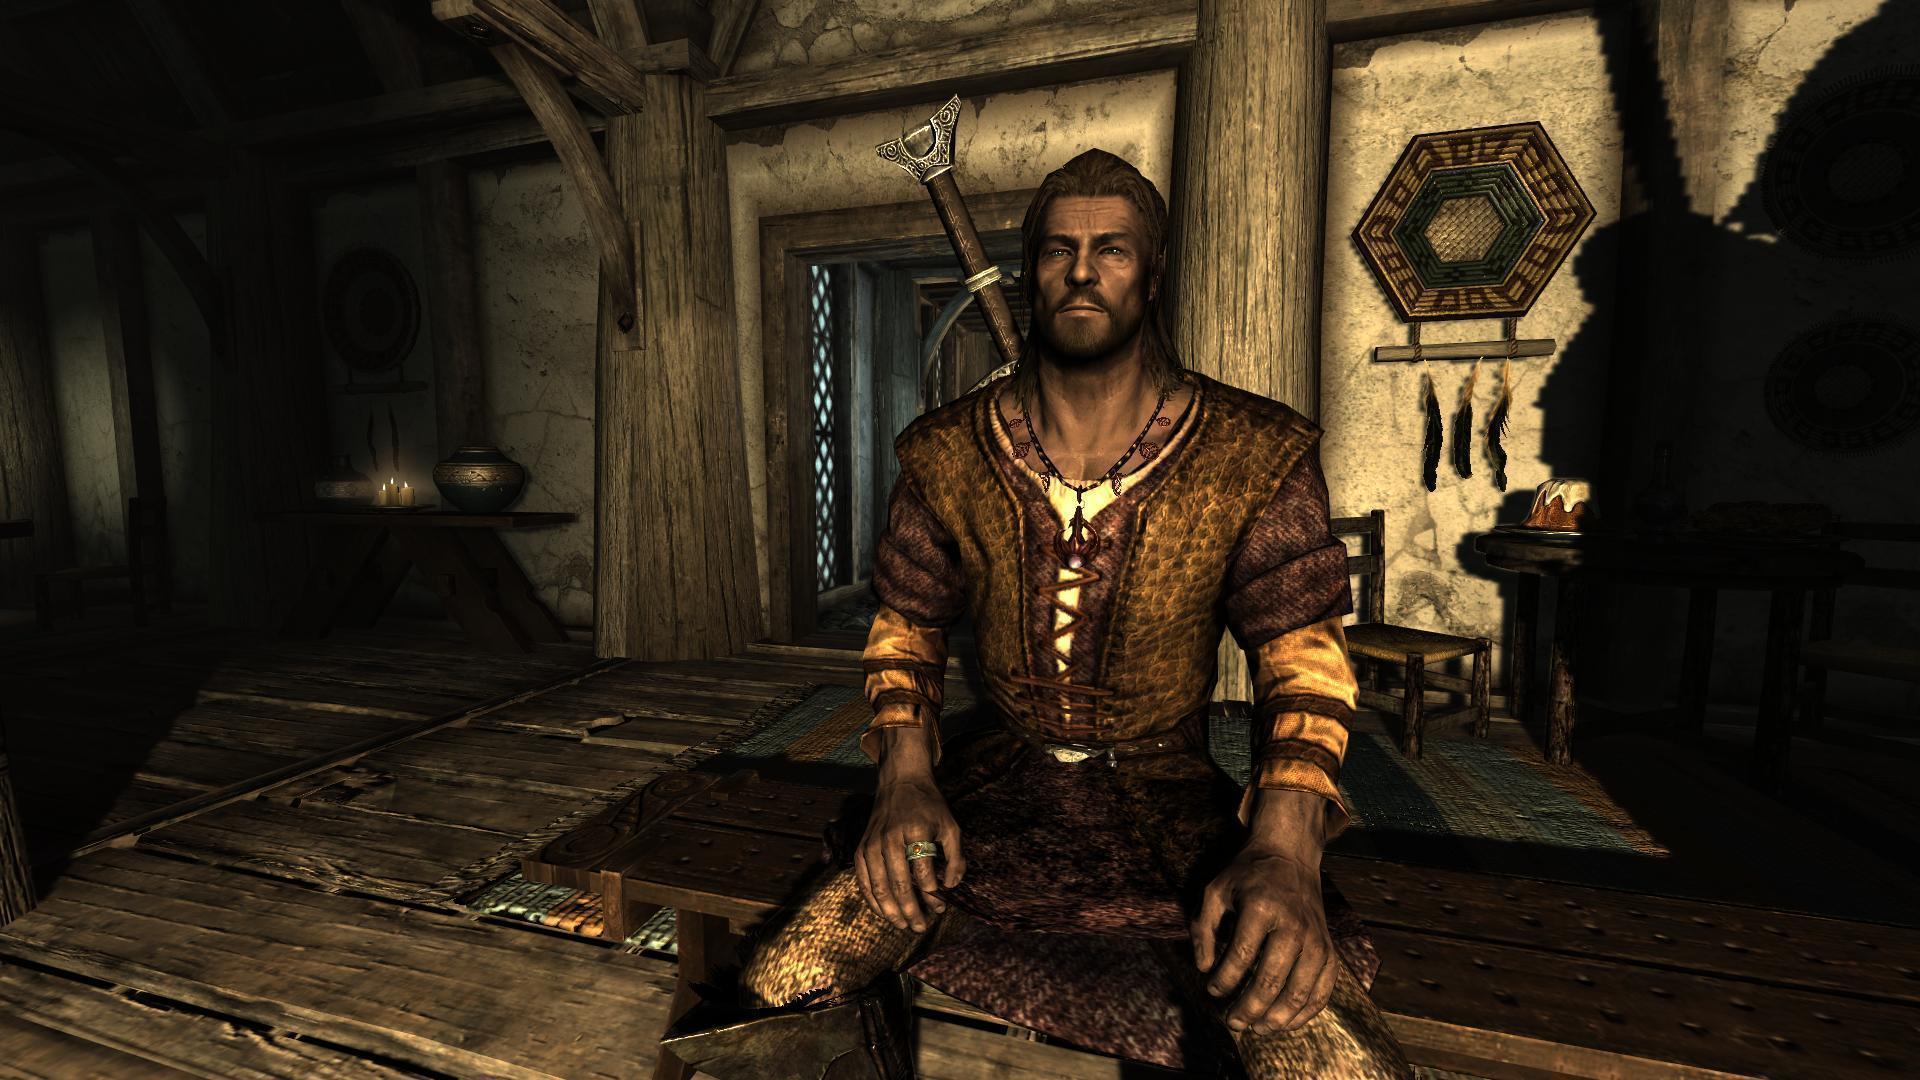 What Does Your Character Look Like? Share With R Skyrim!